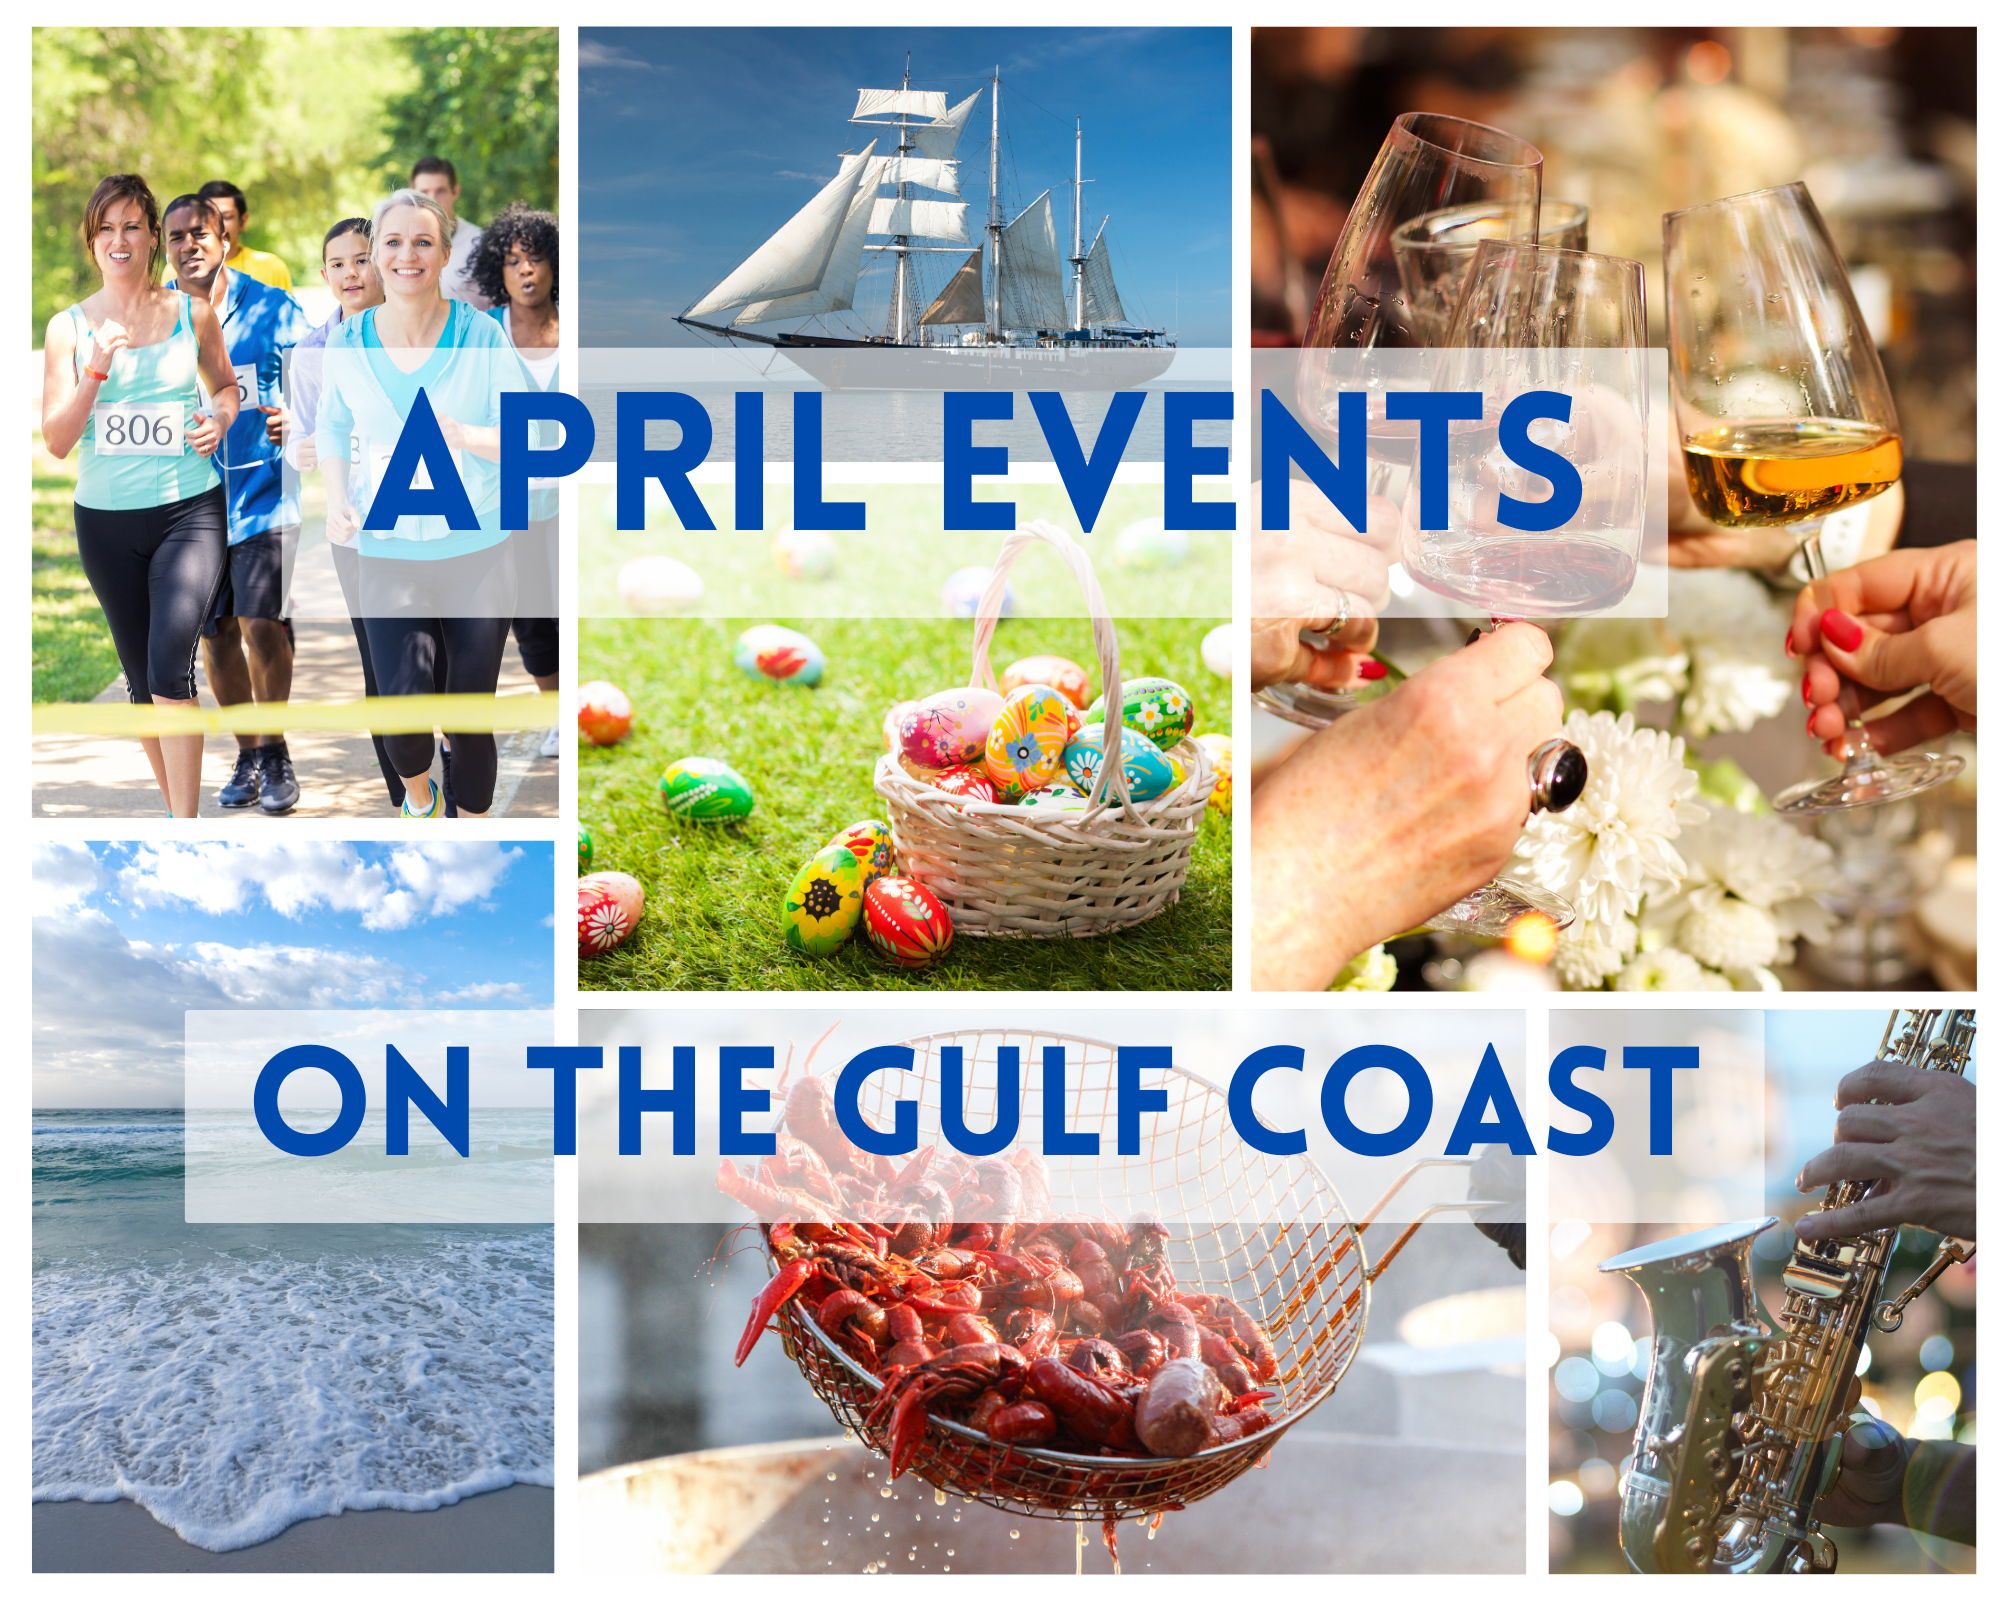 April Events on the Gulf